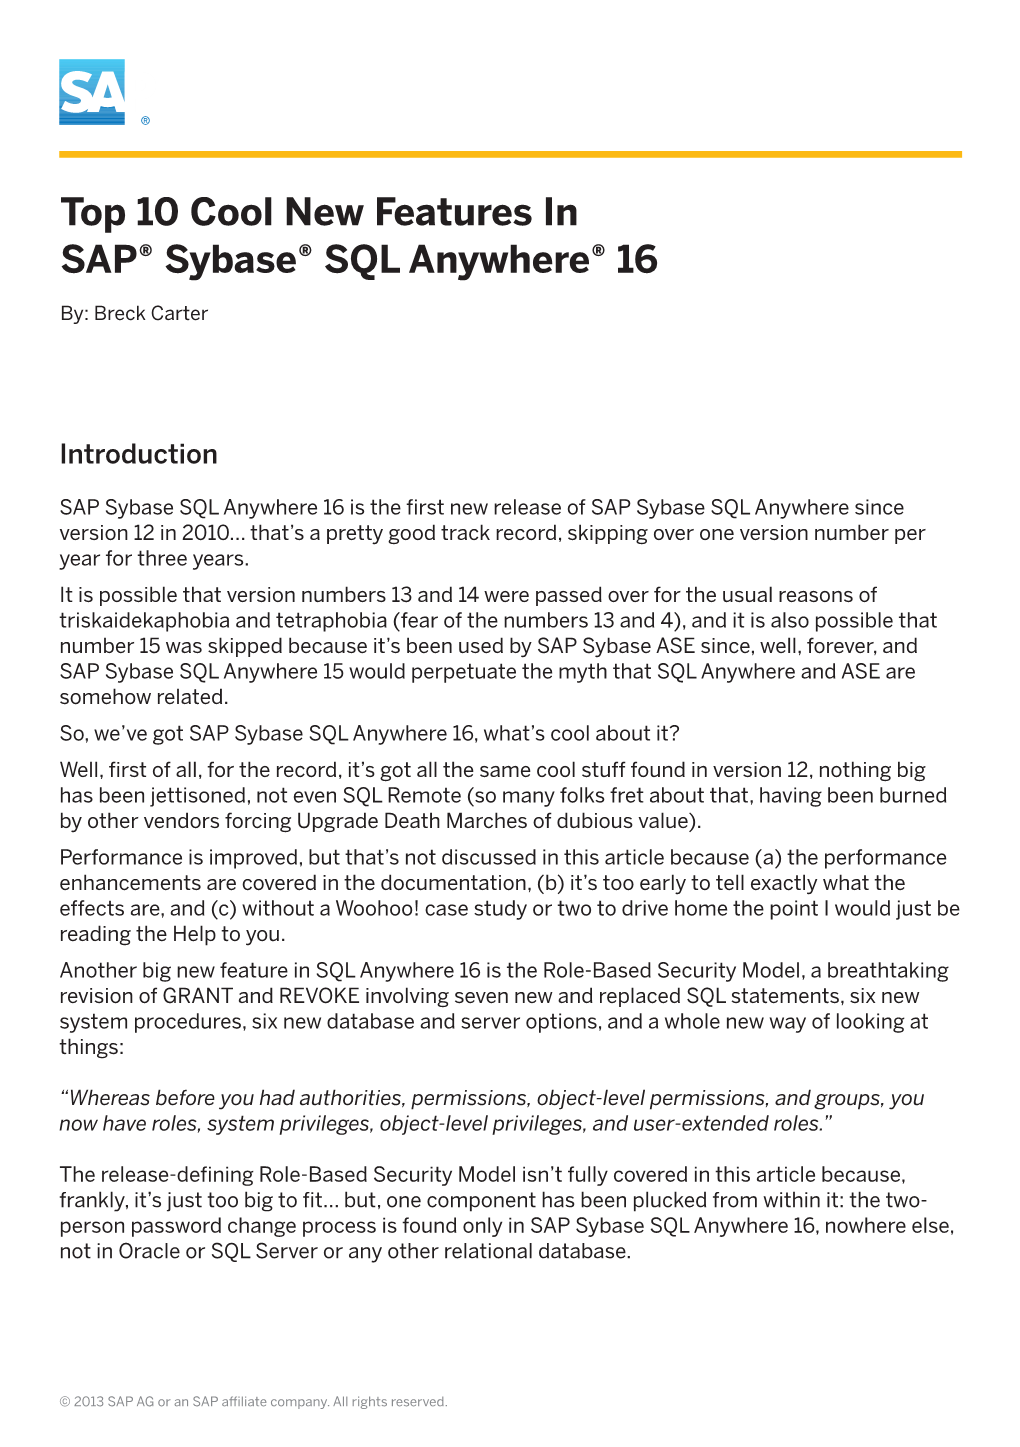 Top 10 Cool New Features in SAP® Sybase® SQL Anywhere® 16